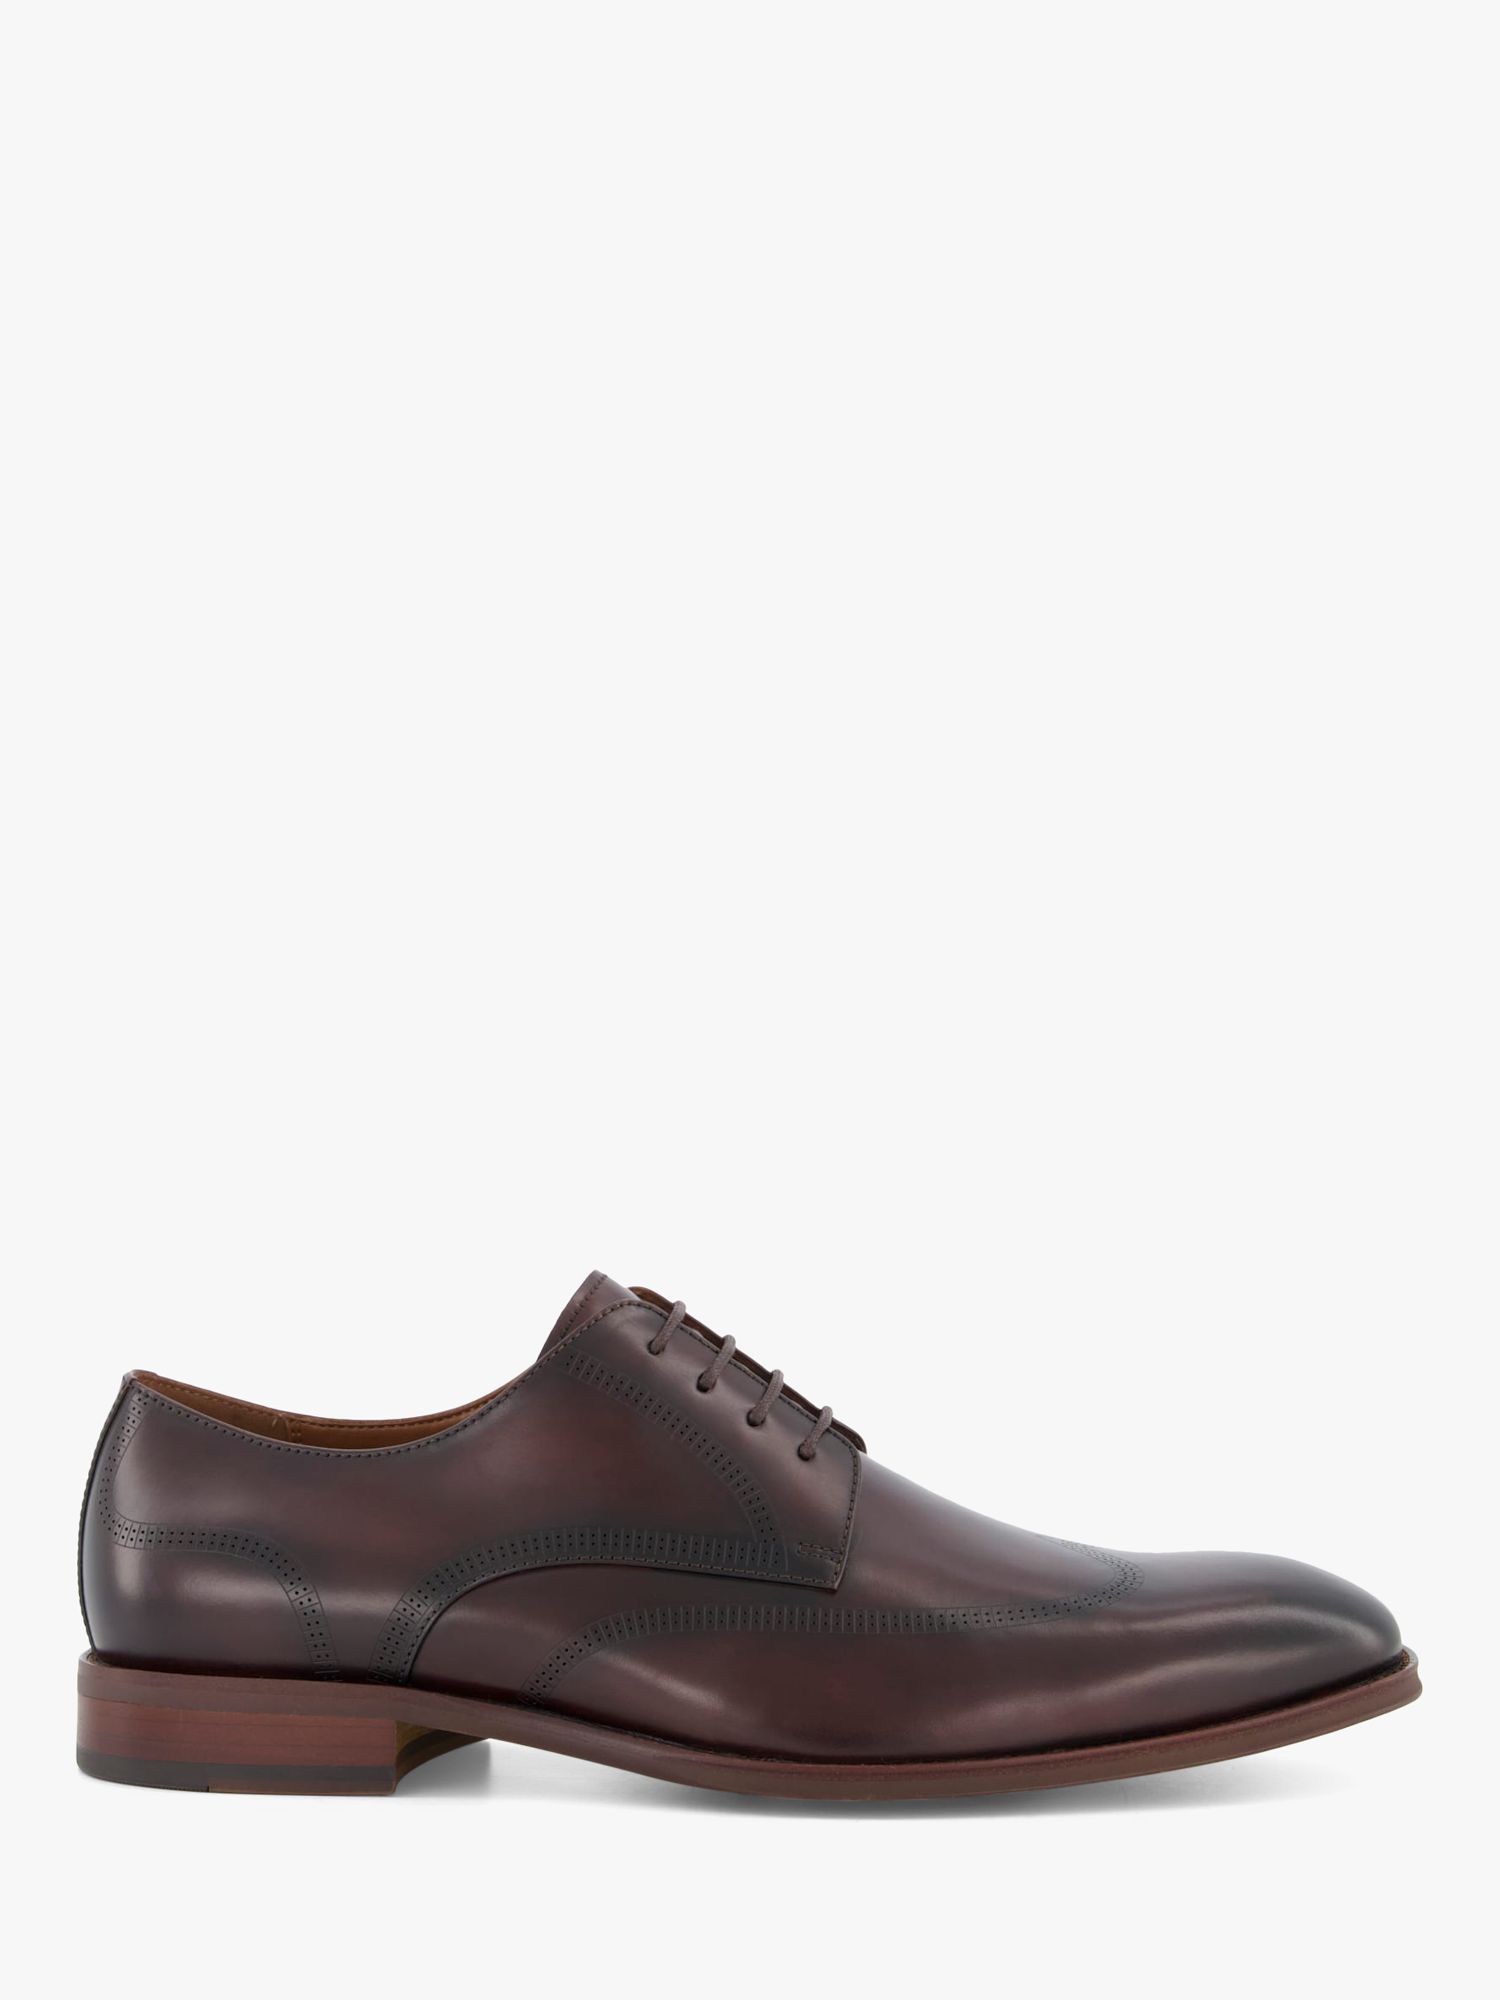 Dune Sword Leather Oxford Shoes, Dark Brown at John Lewis & Partners